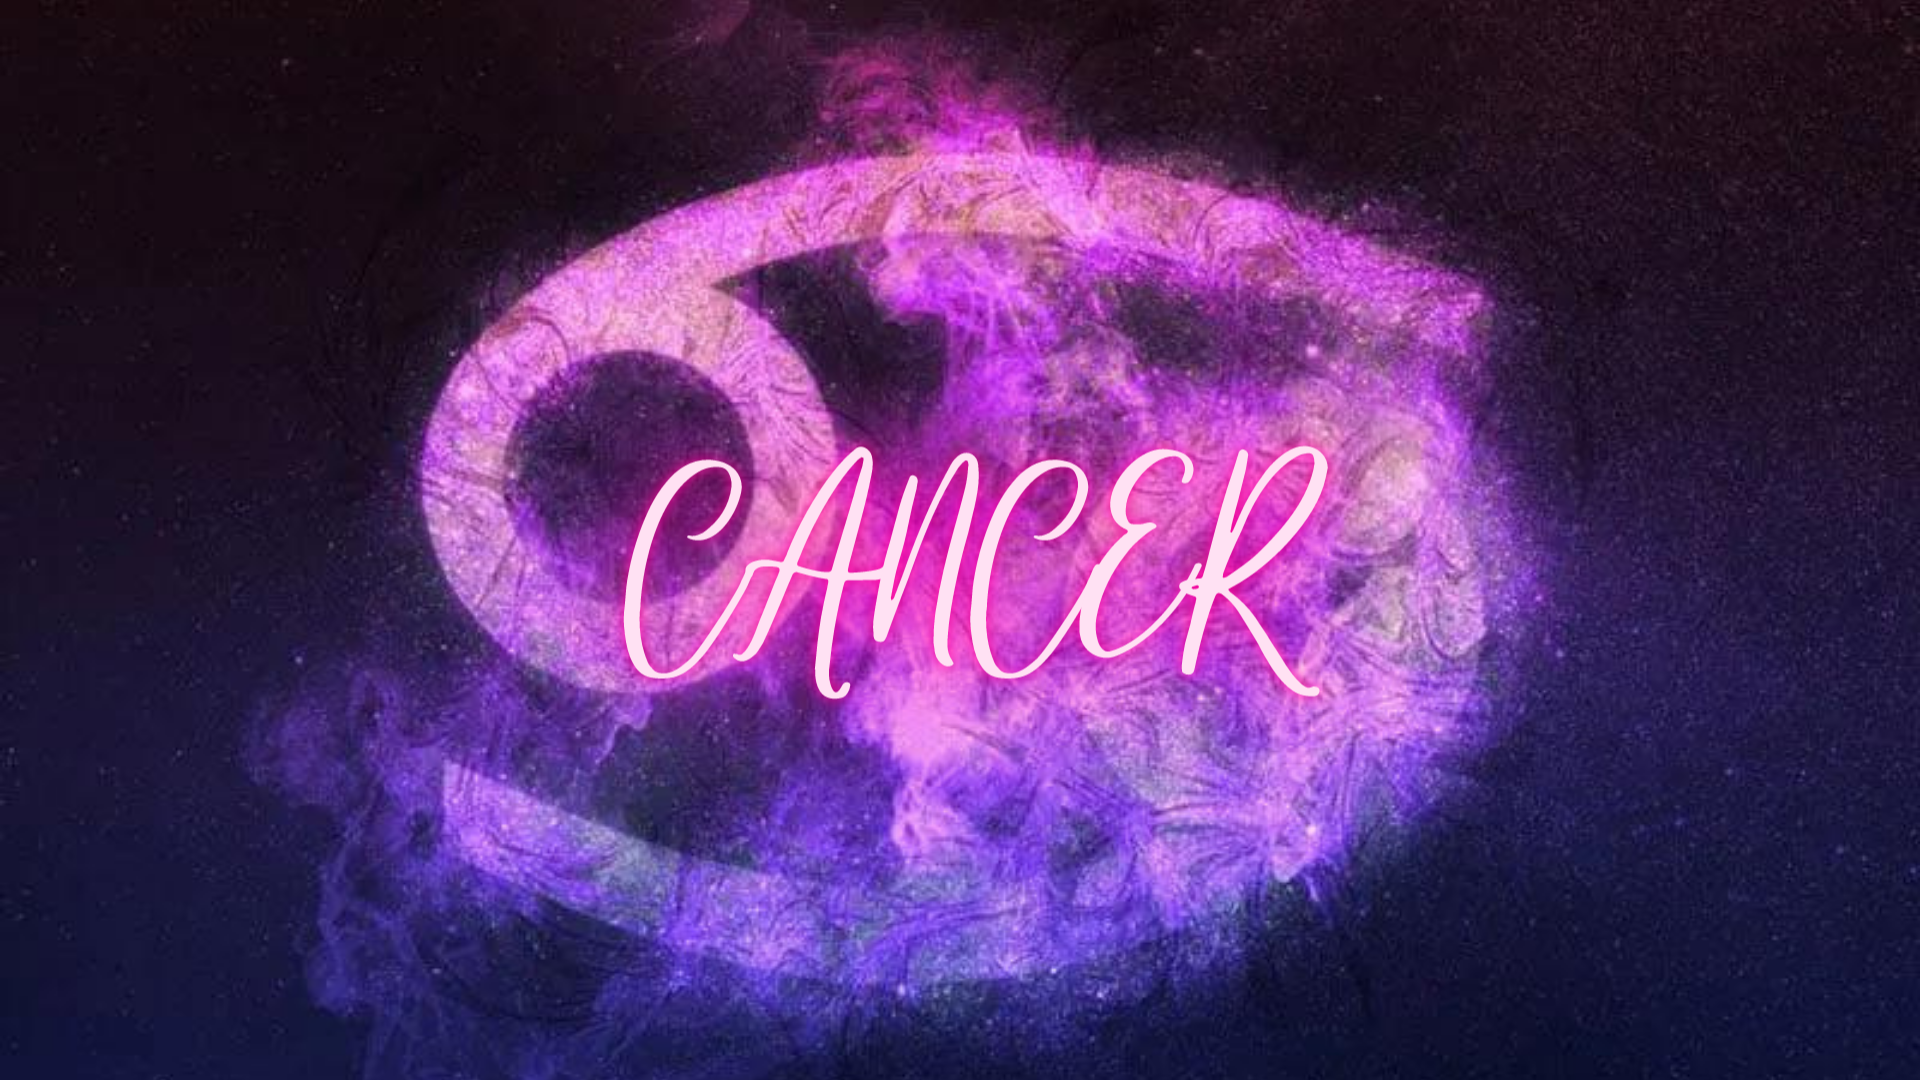 Cancer sign in galaxy background